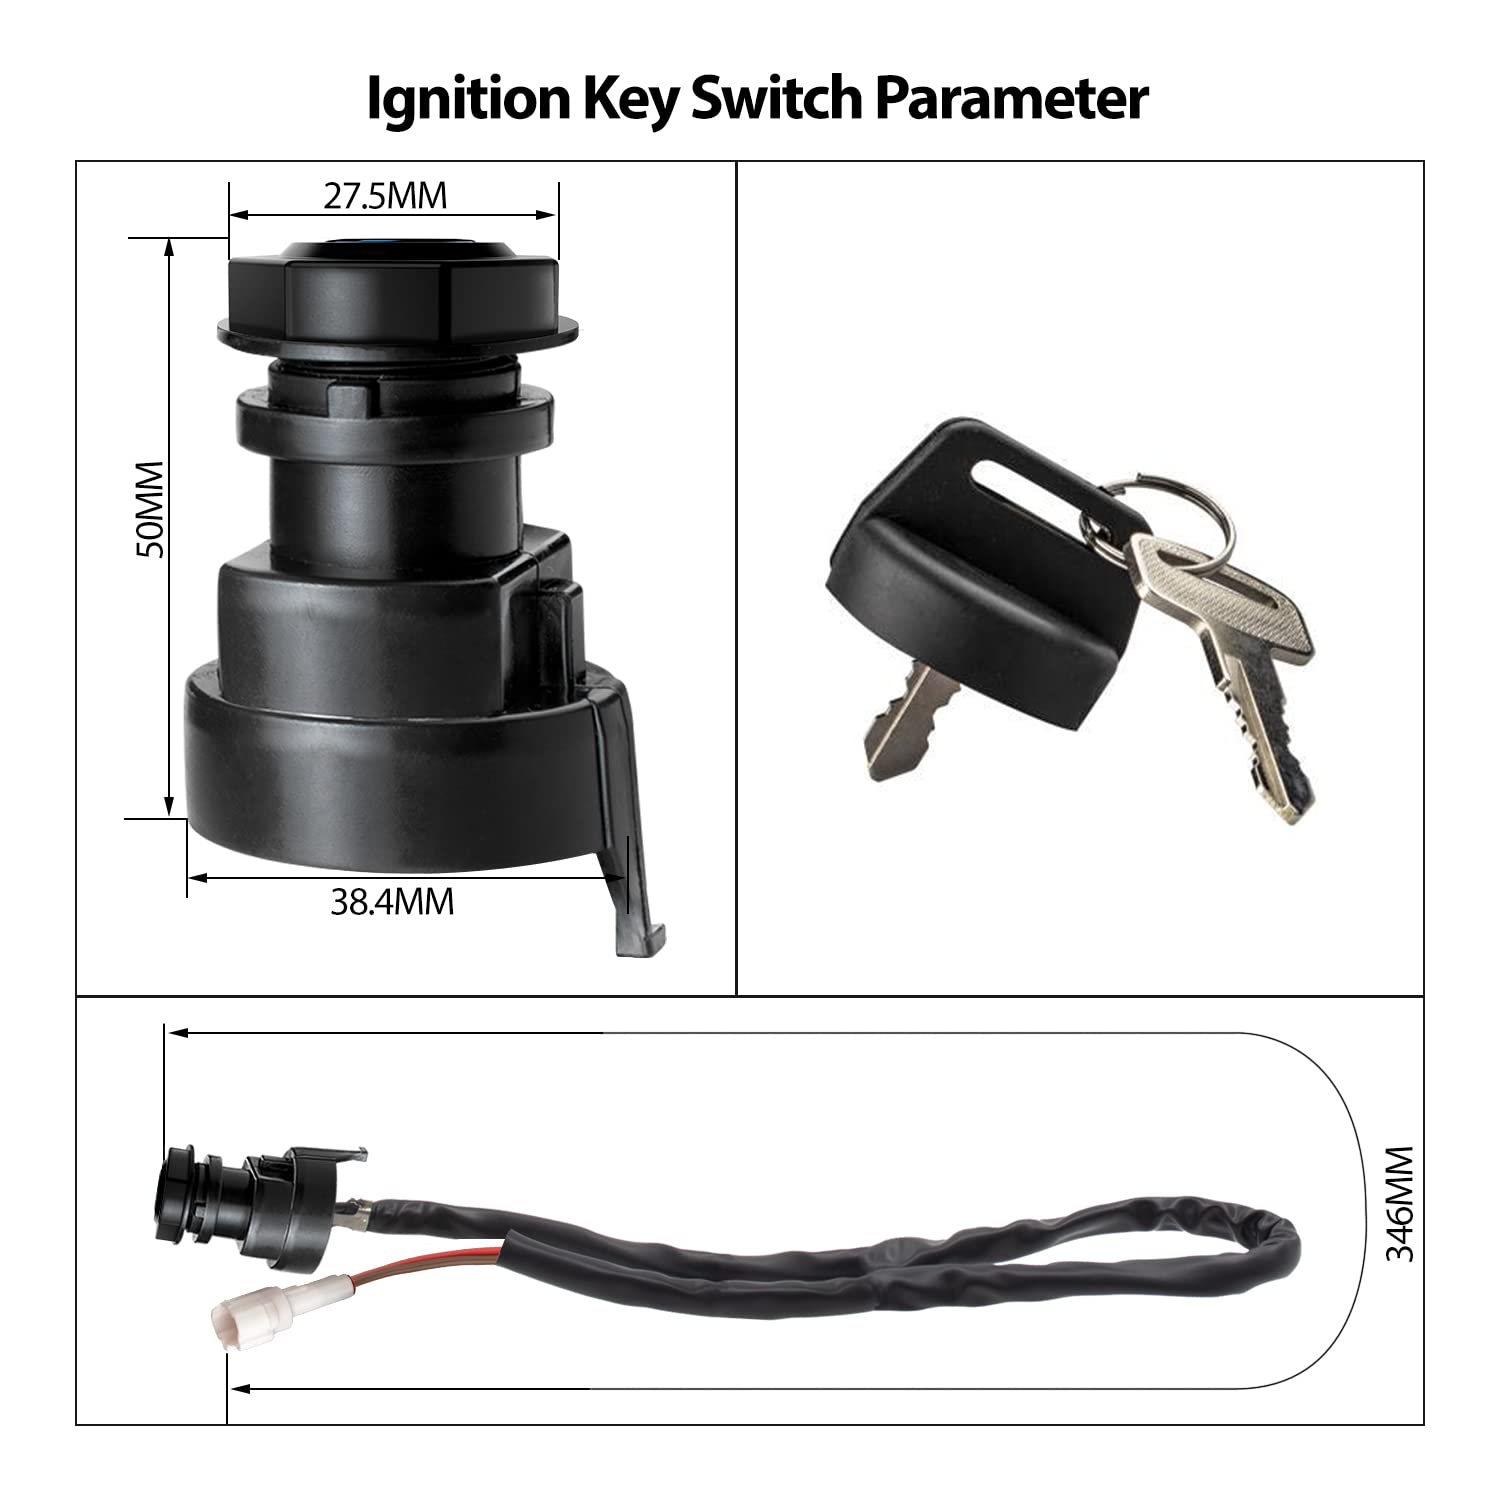 1PZ Ignition Key Switch Replacement for Yamaha Raptor Warrior 350 Grizzly Bruin 350 Raptor 250 660R 700 Breeze Grizzly 125 Banshee 350 Wolverine YFM350X ATV